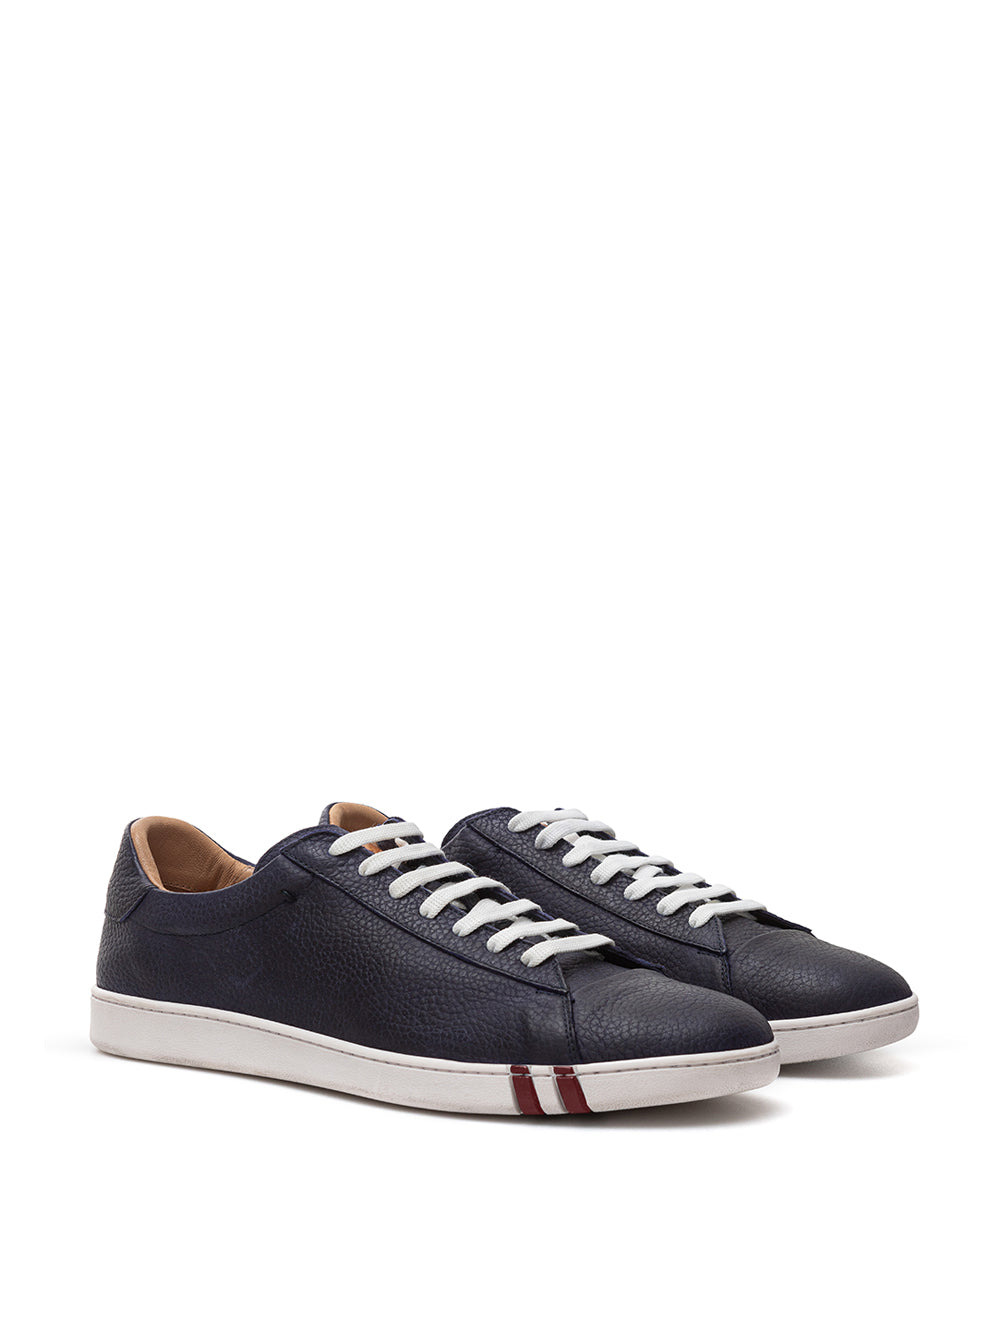 Bally Blue Leather Low Sneakers